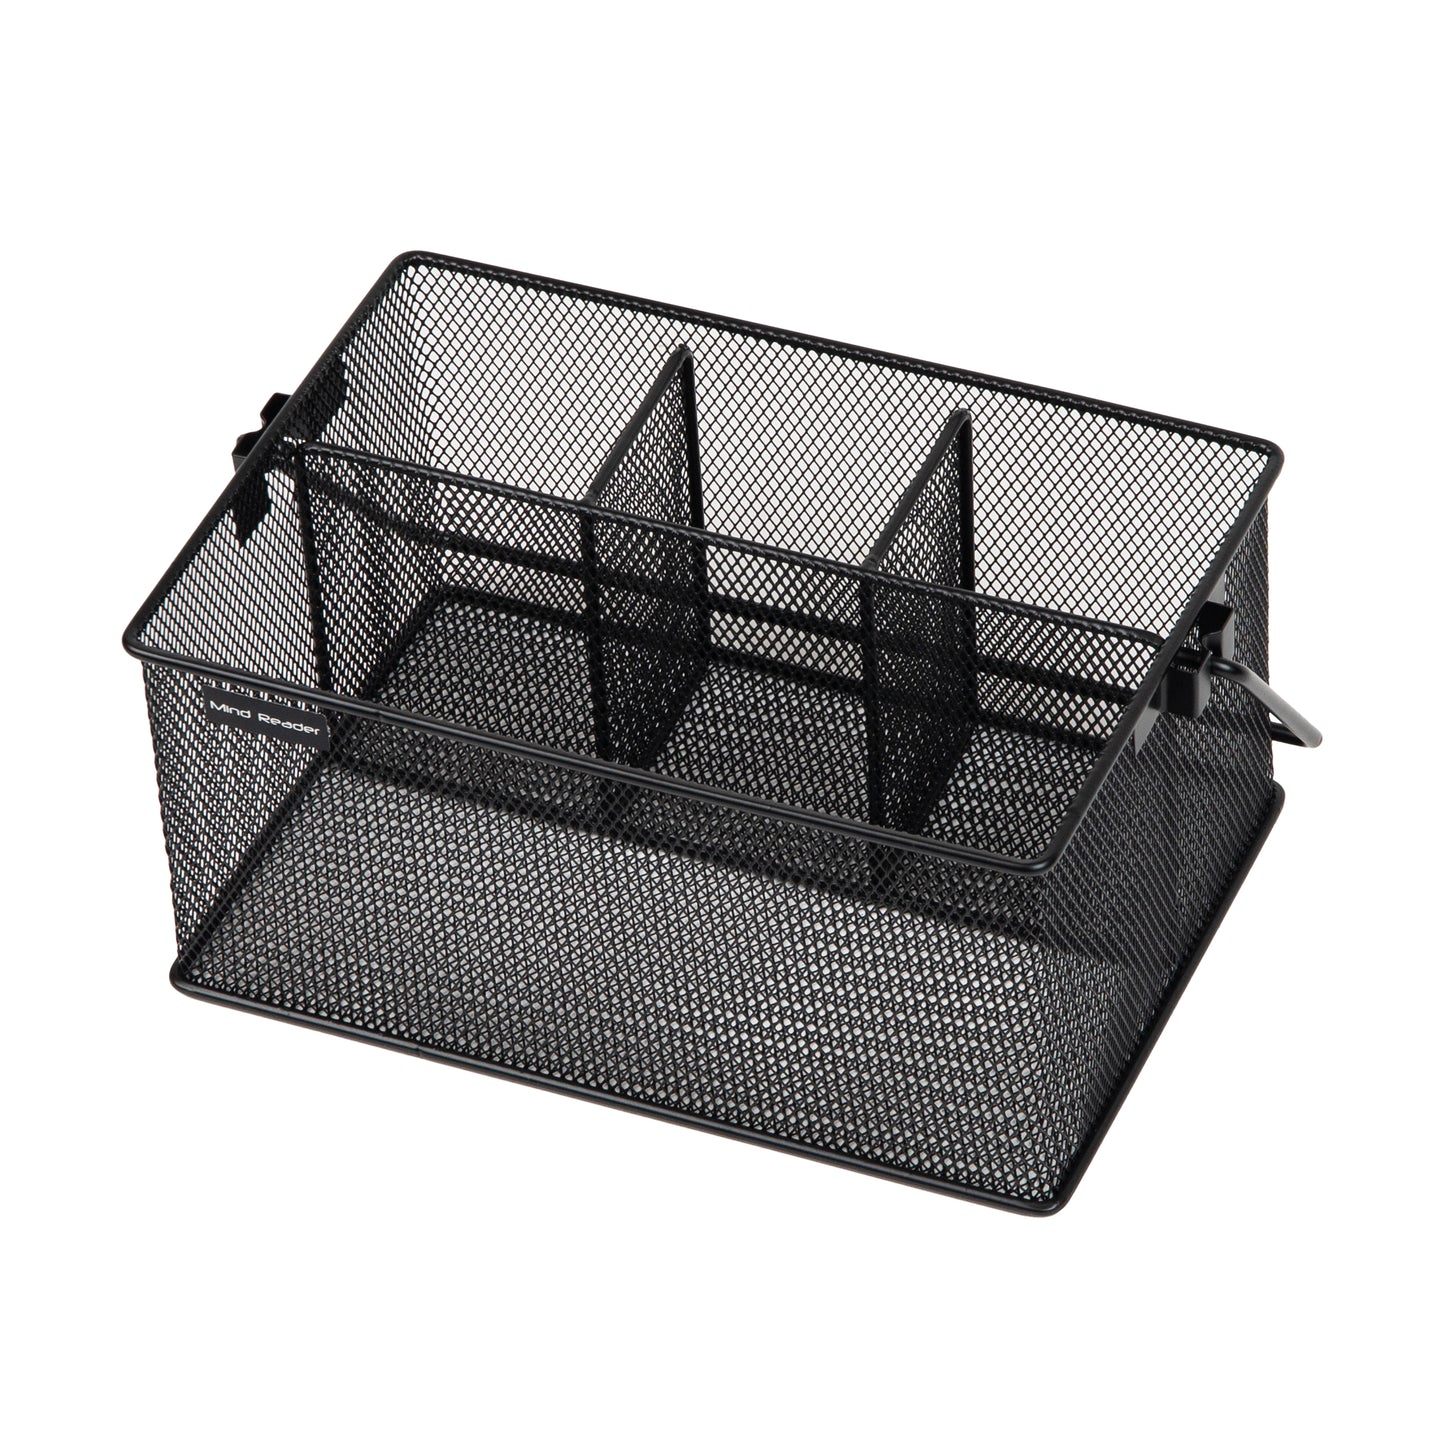 Mind Reader Network Collection, 4-Compartment Utensil or Supply Caddy with Handle, Countertop or Desktop Organizer, Metal Mesh